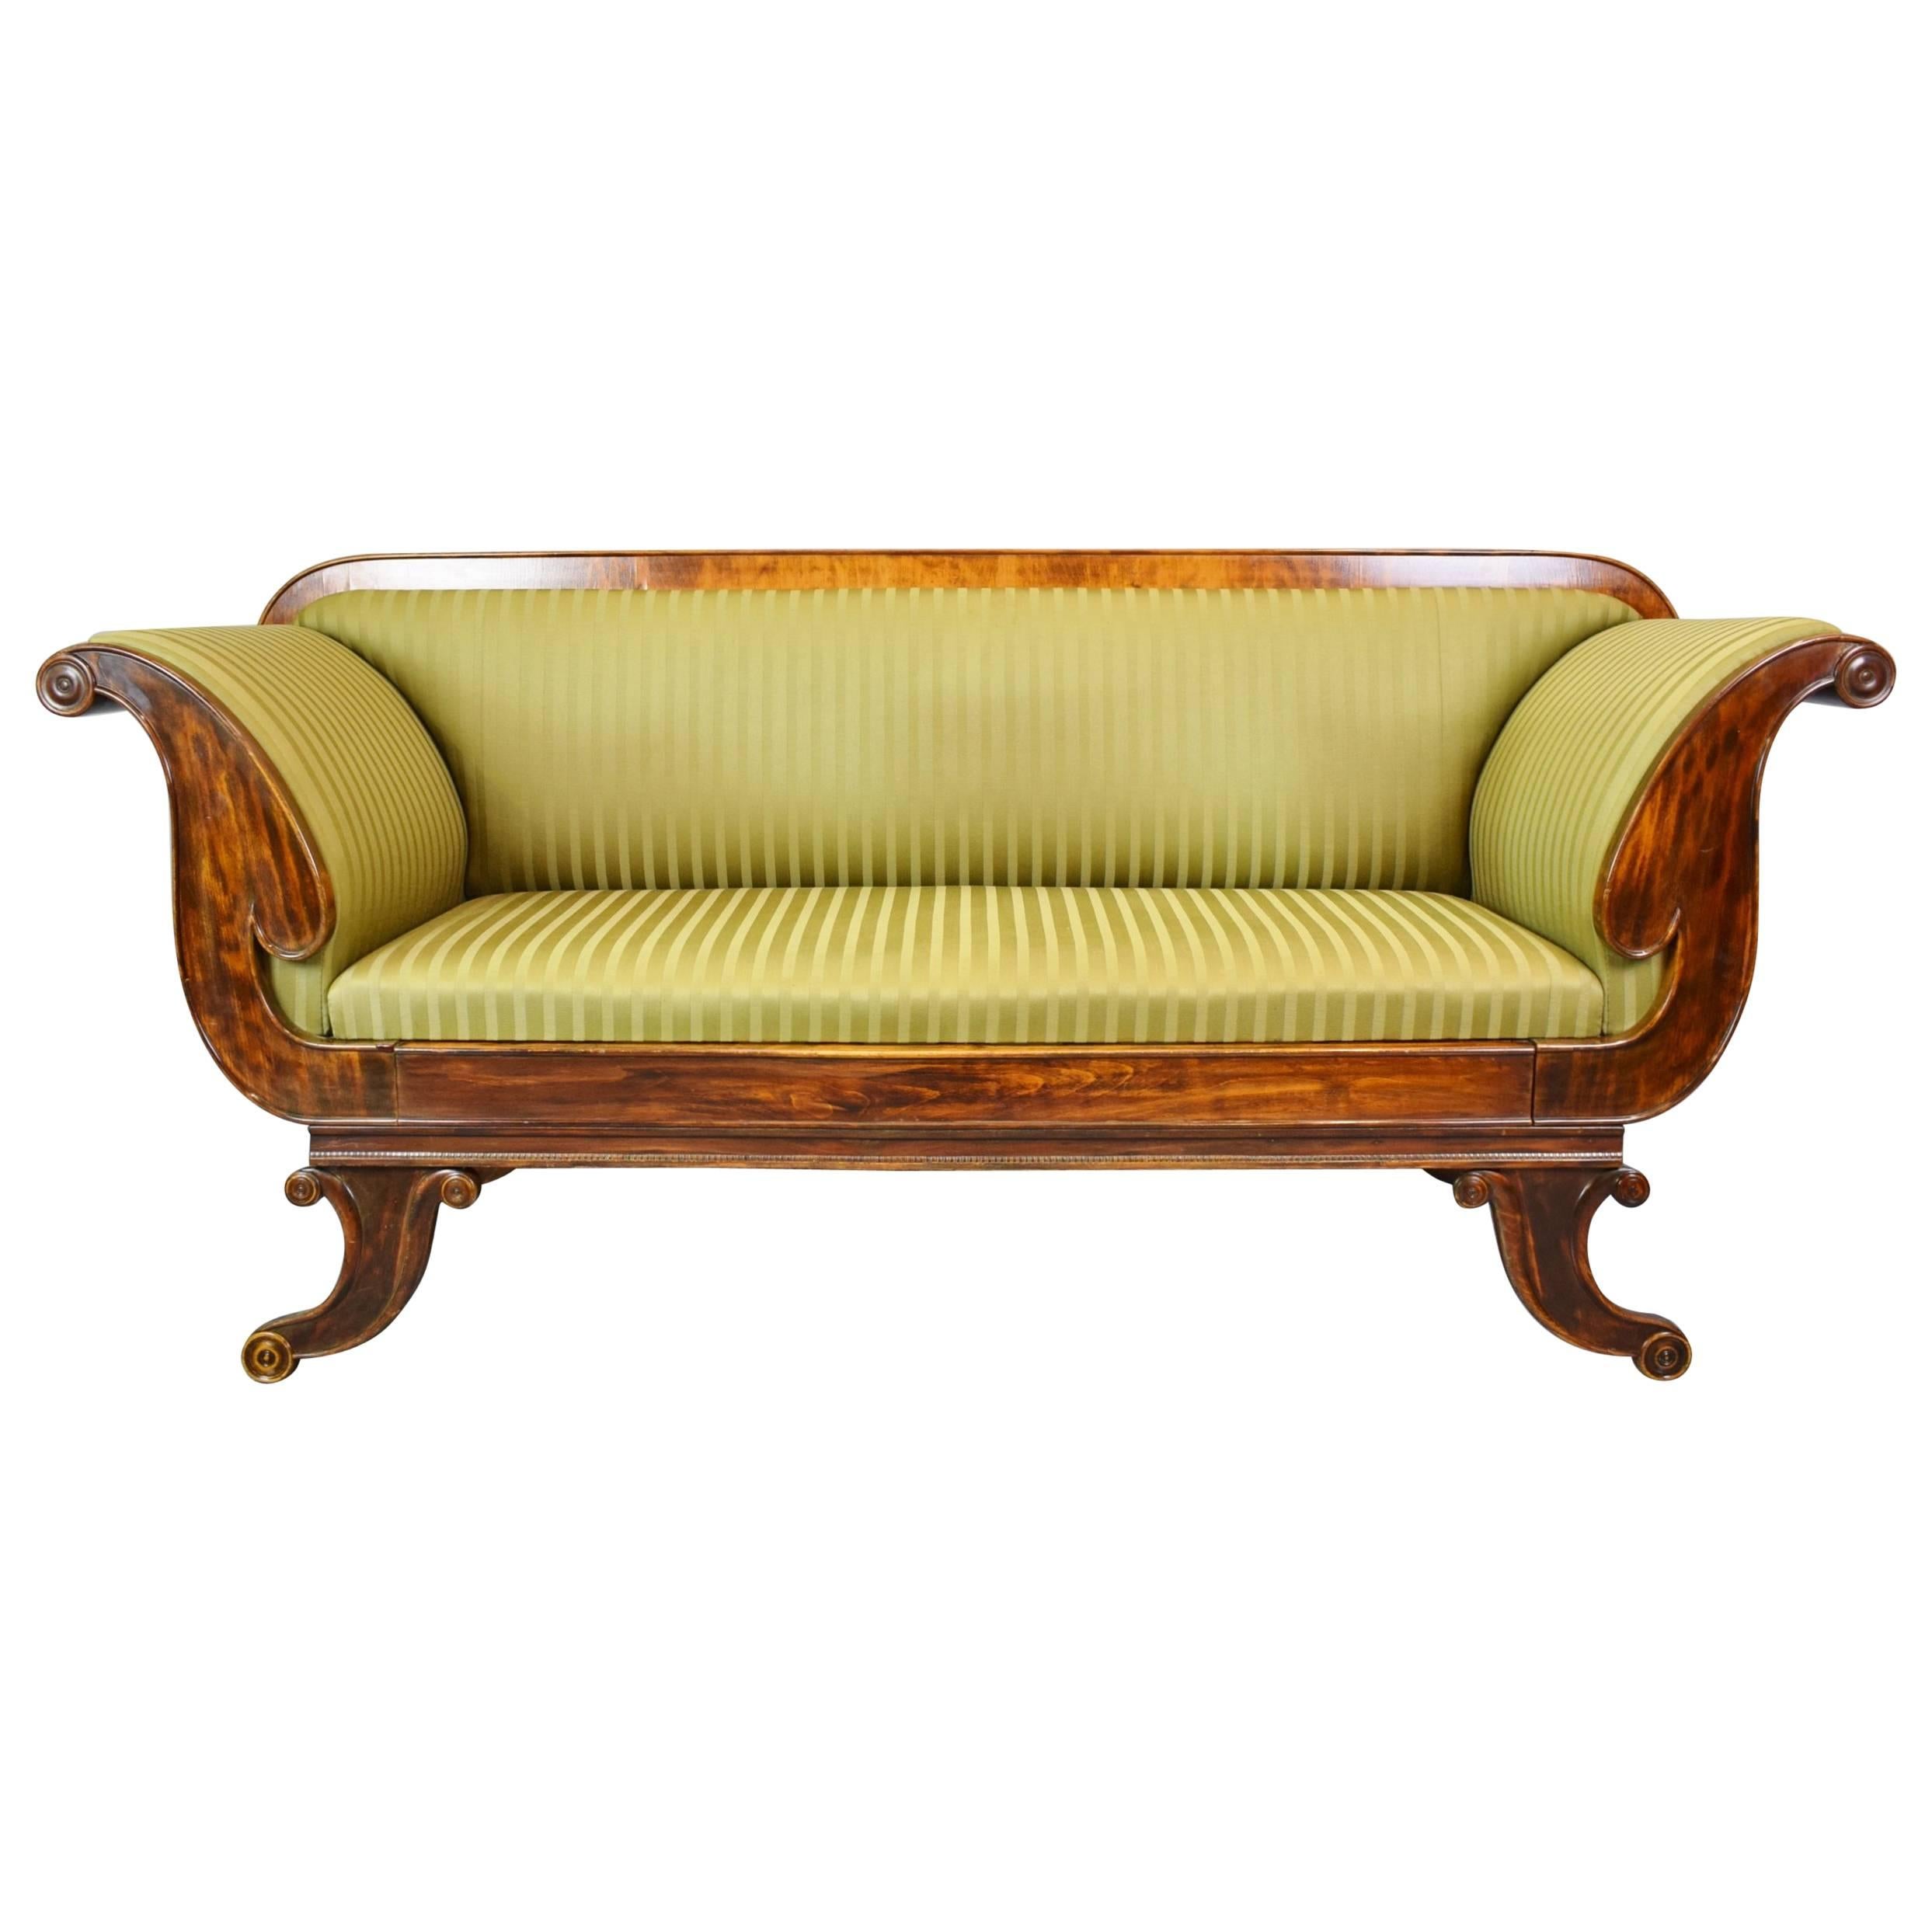 Stunning Victorian Regency Mahogany and Beech Scroll Arm Sofa Chaise, circa 1850 For Sale